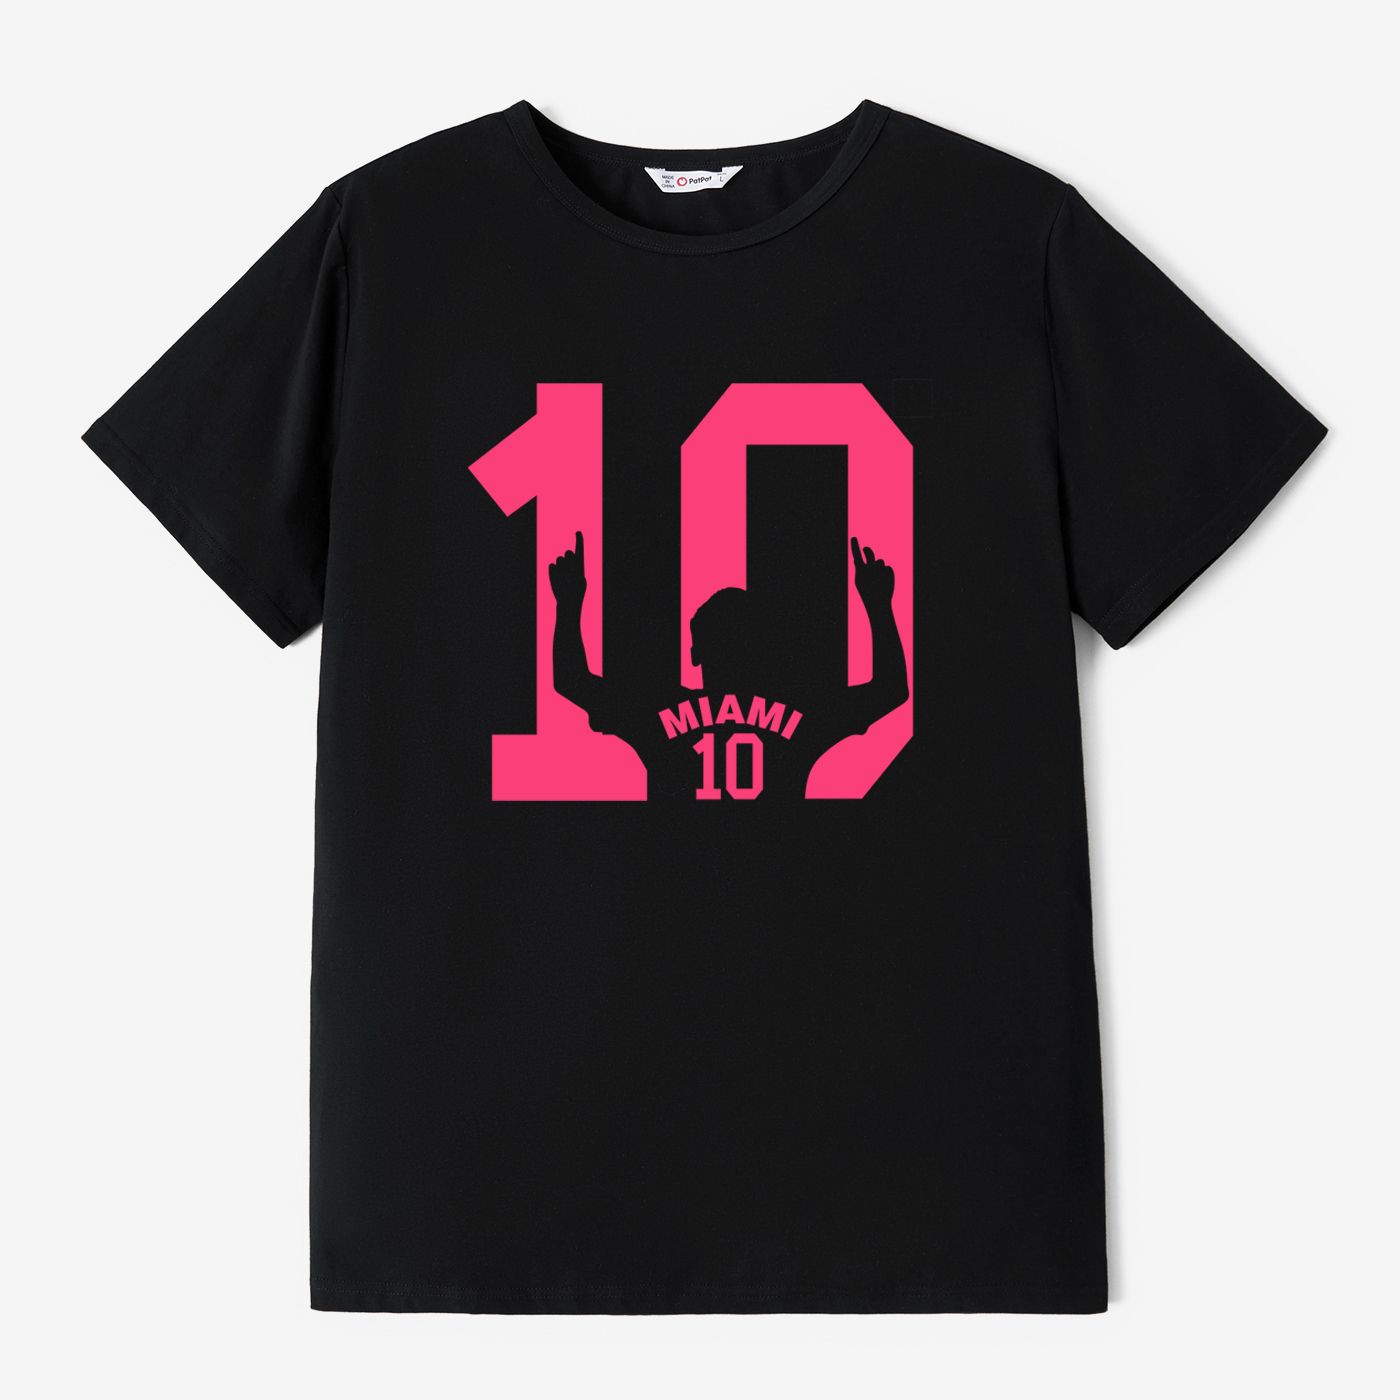 Family Matching Pink 10 Print Short-sleeve Tops